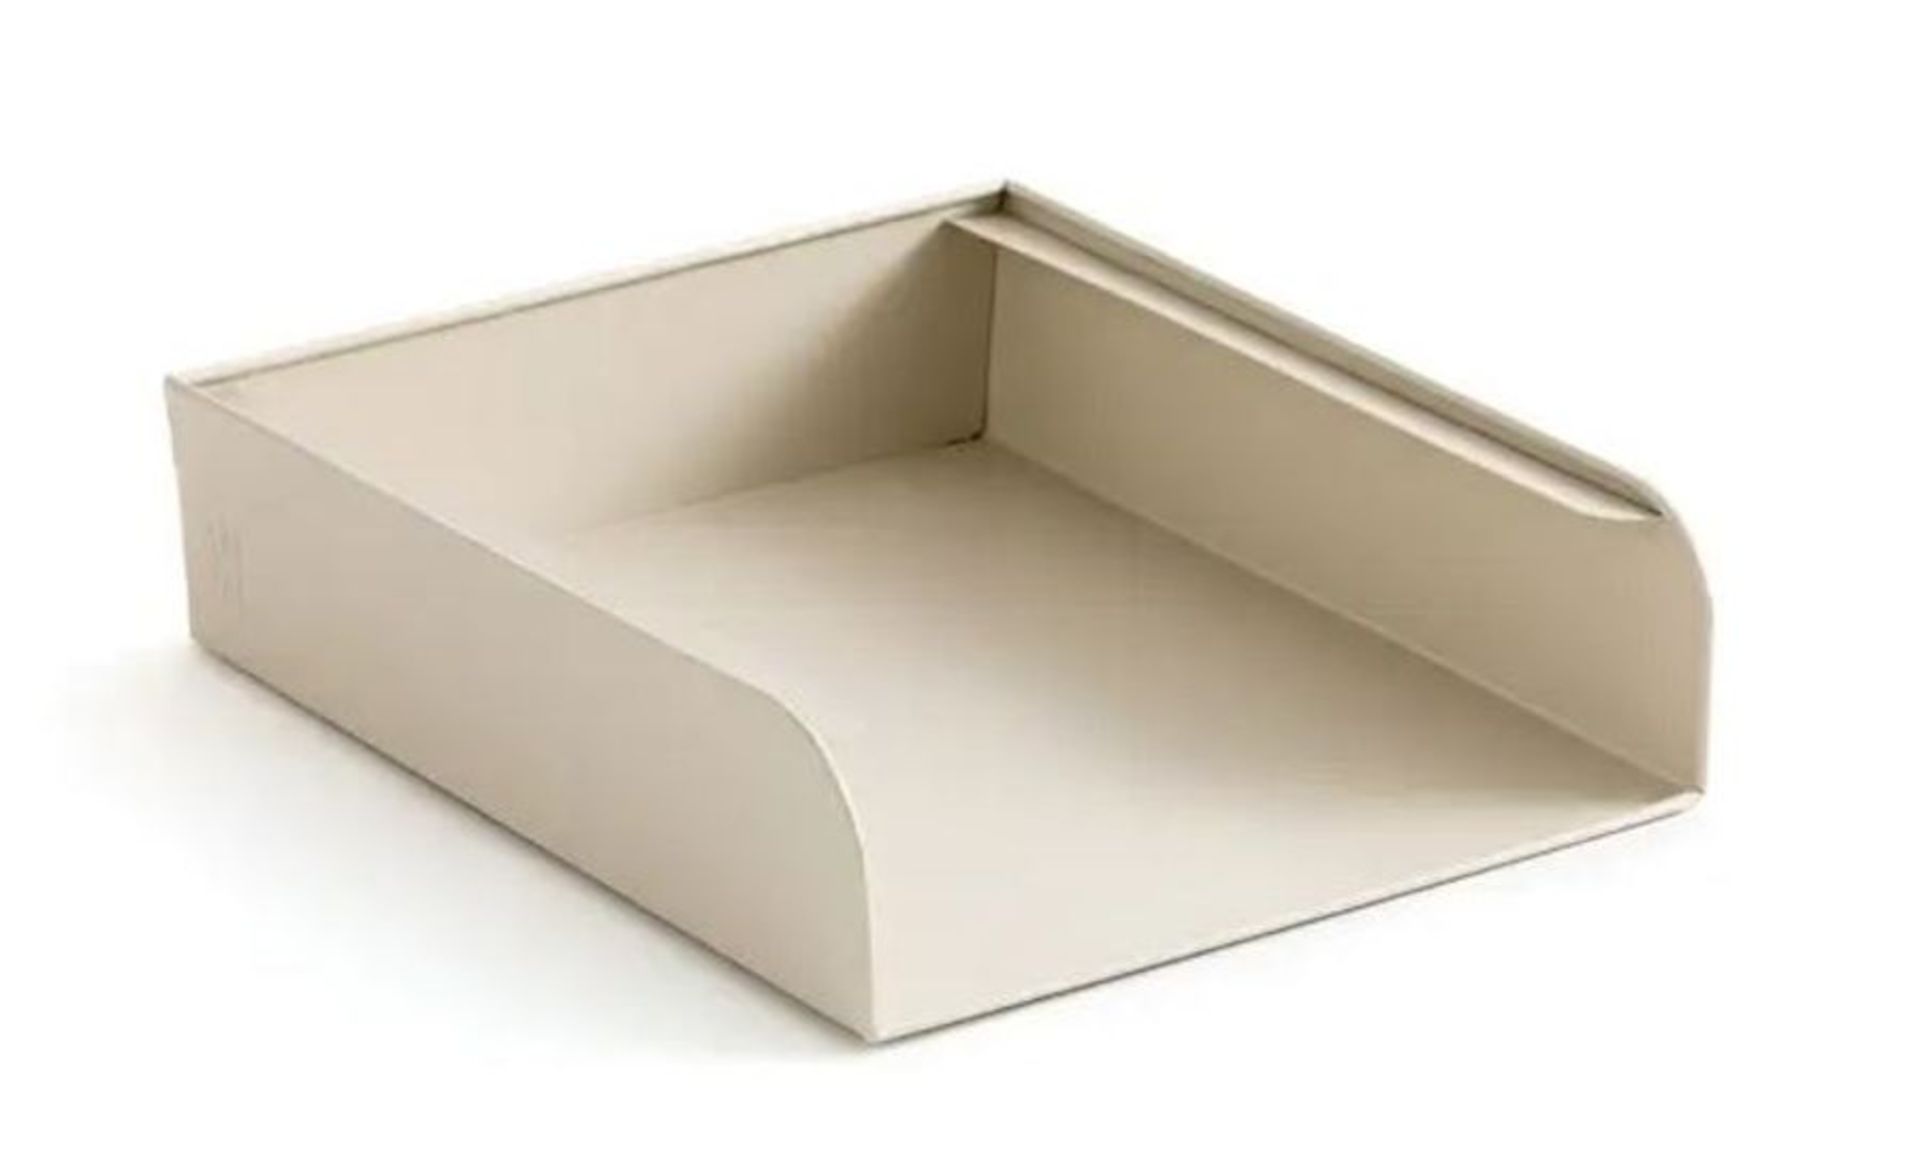 ARREGLO METAL PAPER TRAY / RRP £25.00 / CUSTOMER RETURN. GRADE A (COLOUR DIFFERENT THAN PICTURED,